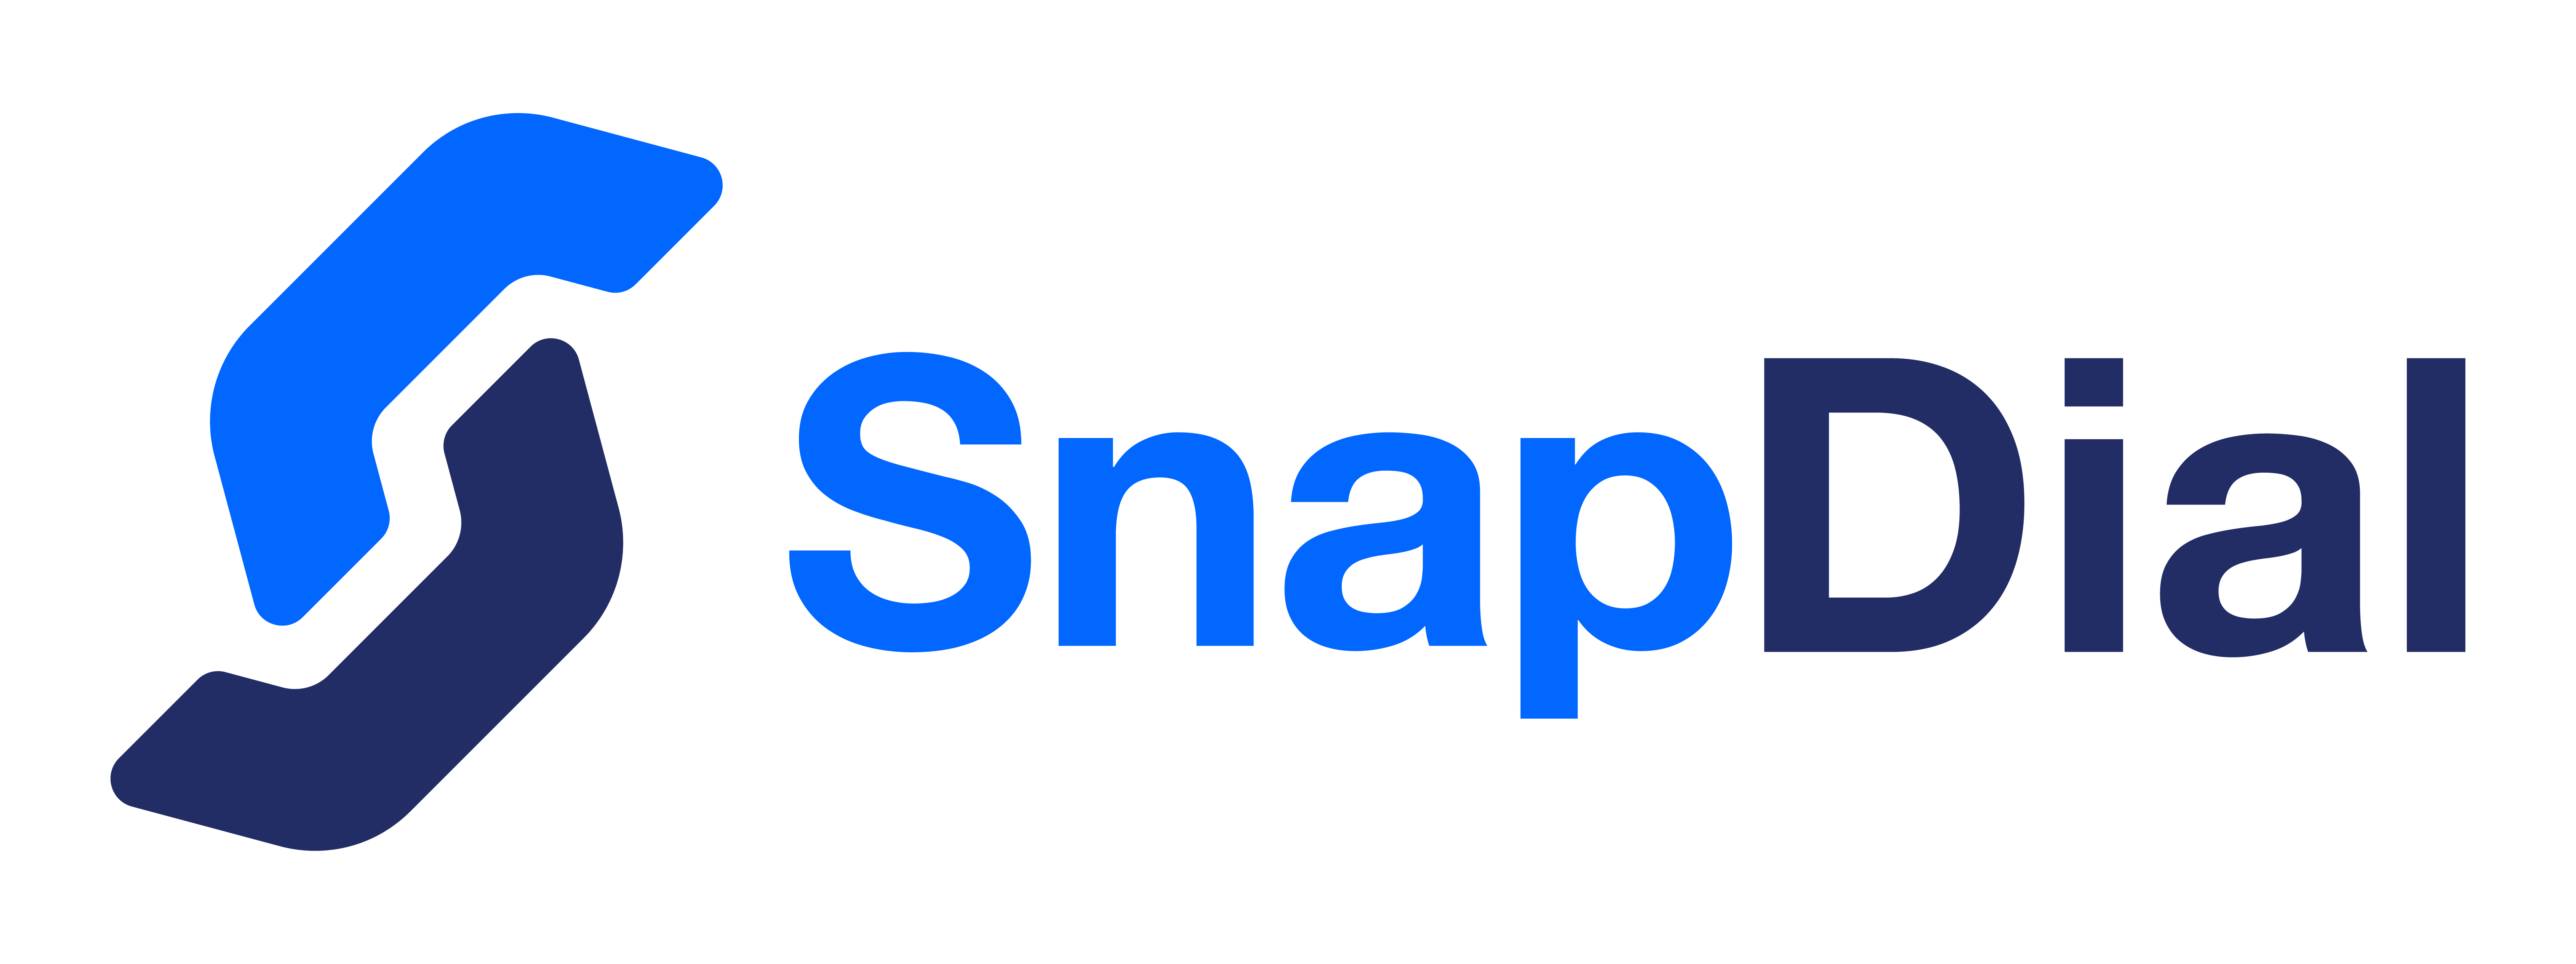 SnapDial